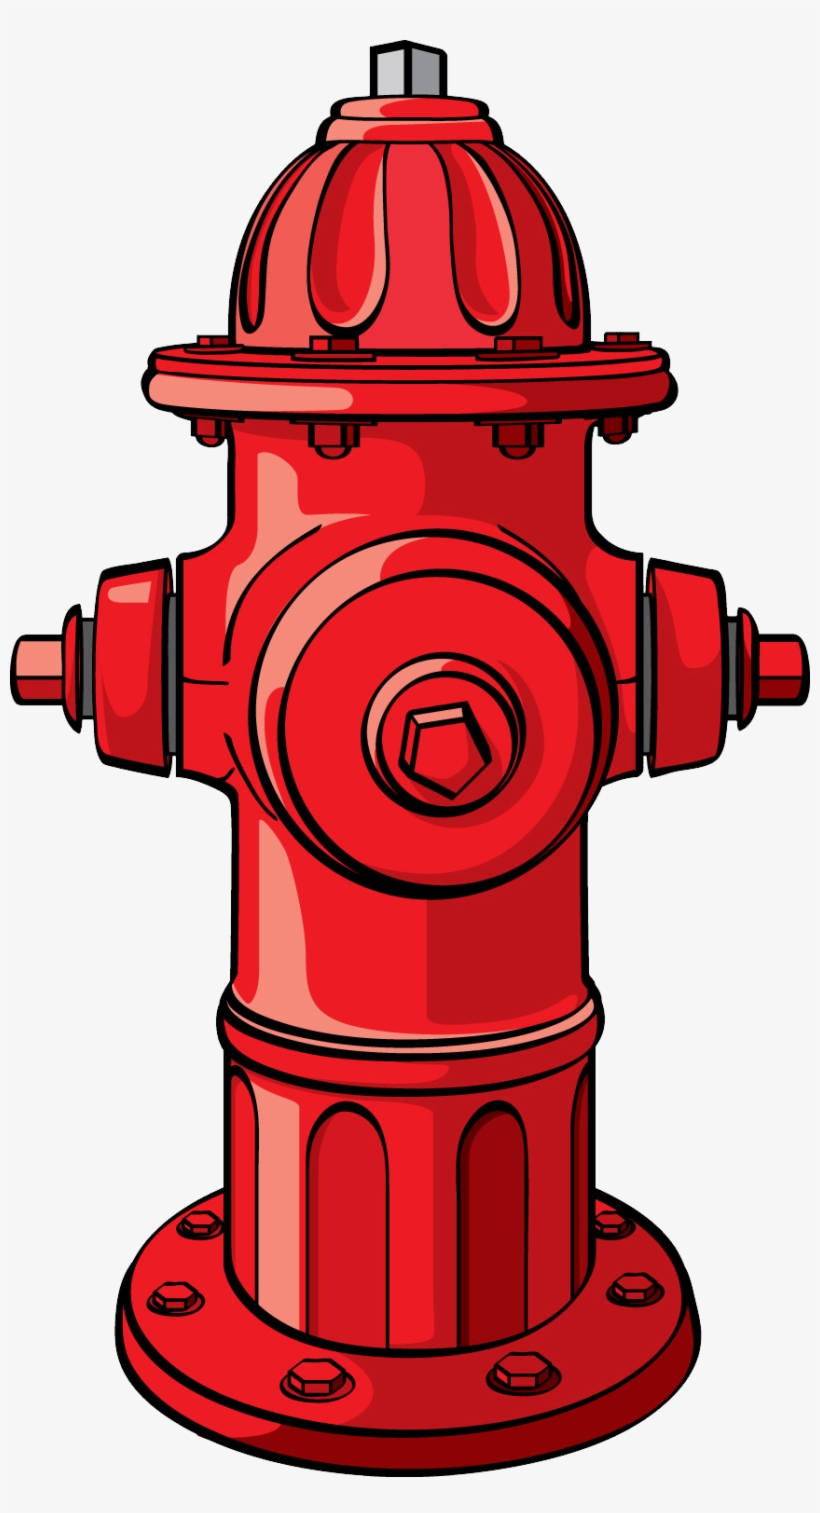 Fire Hydrant Png - Clip Art Fire Hydrant, transparent png #897077